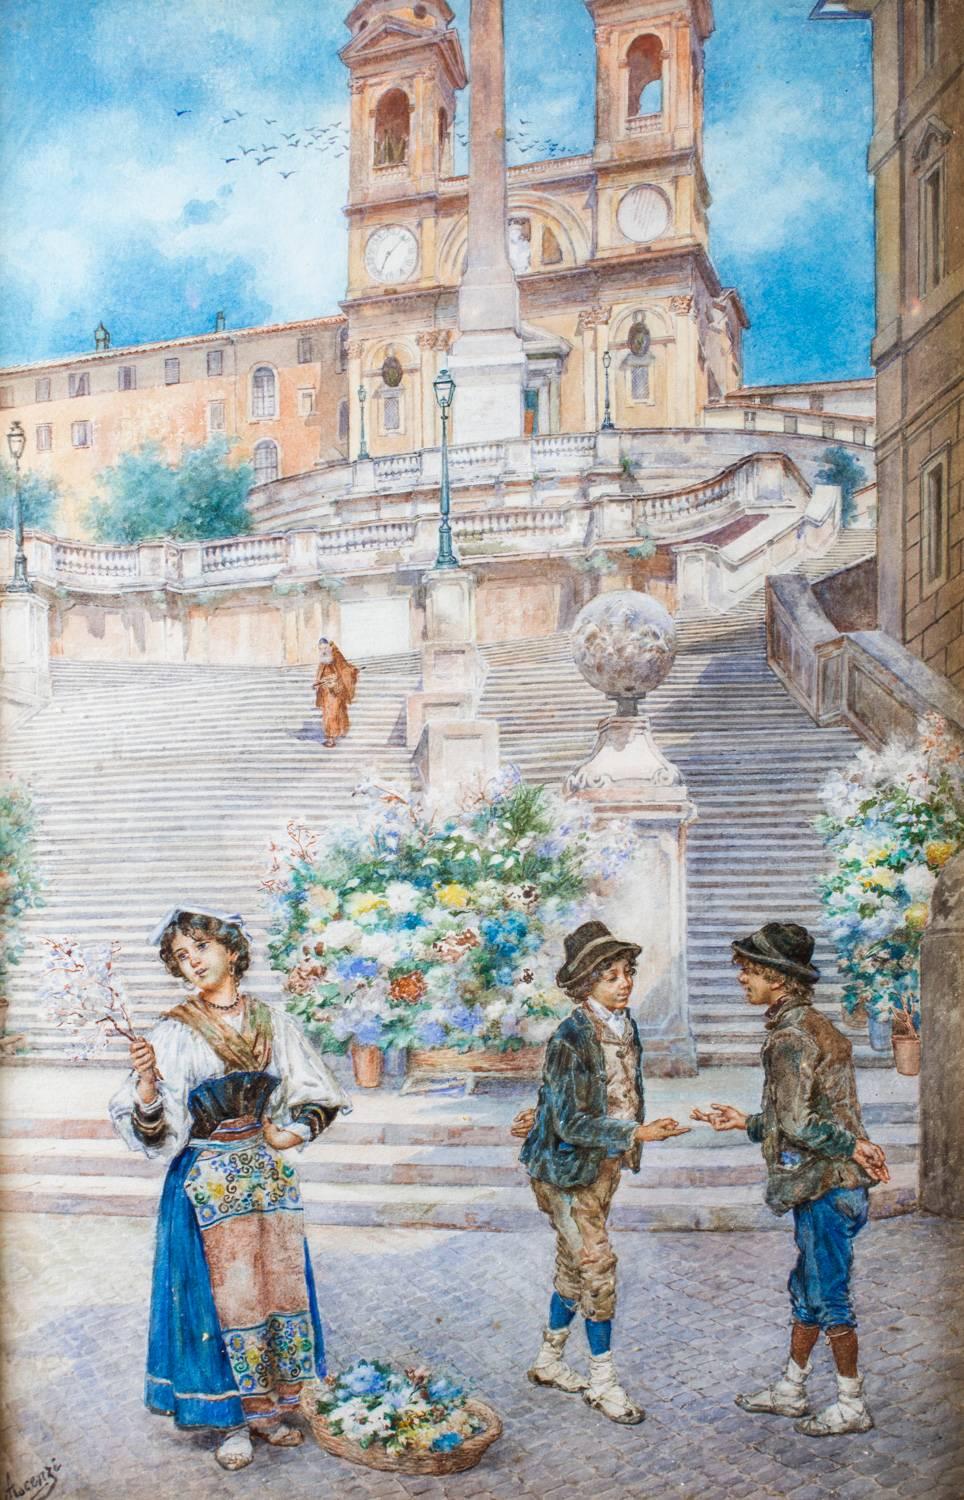 This is a beautiful antique watercolour study by Ettore Ascenzi of the Spanish Steps, Rome, circa 1890.

The colors are incredibly vibrant for its age and the painting is in it's beautiful original giltwood frame.

Auction sales:
La